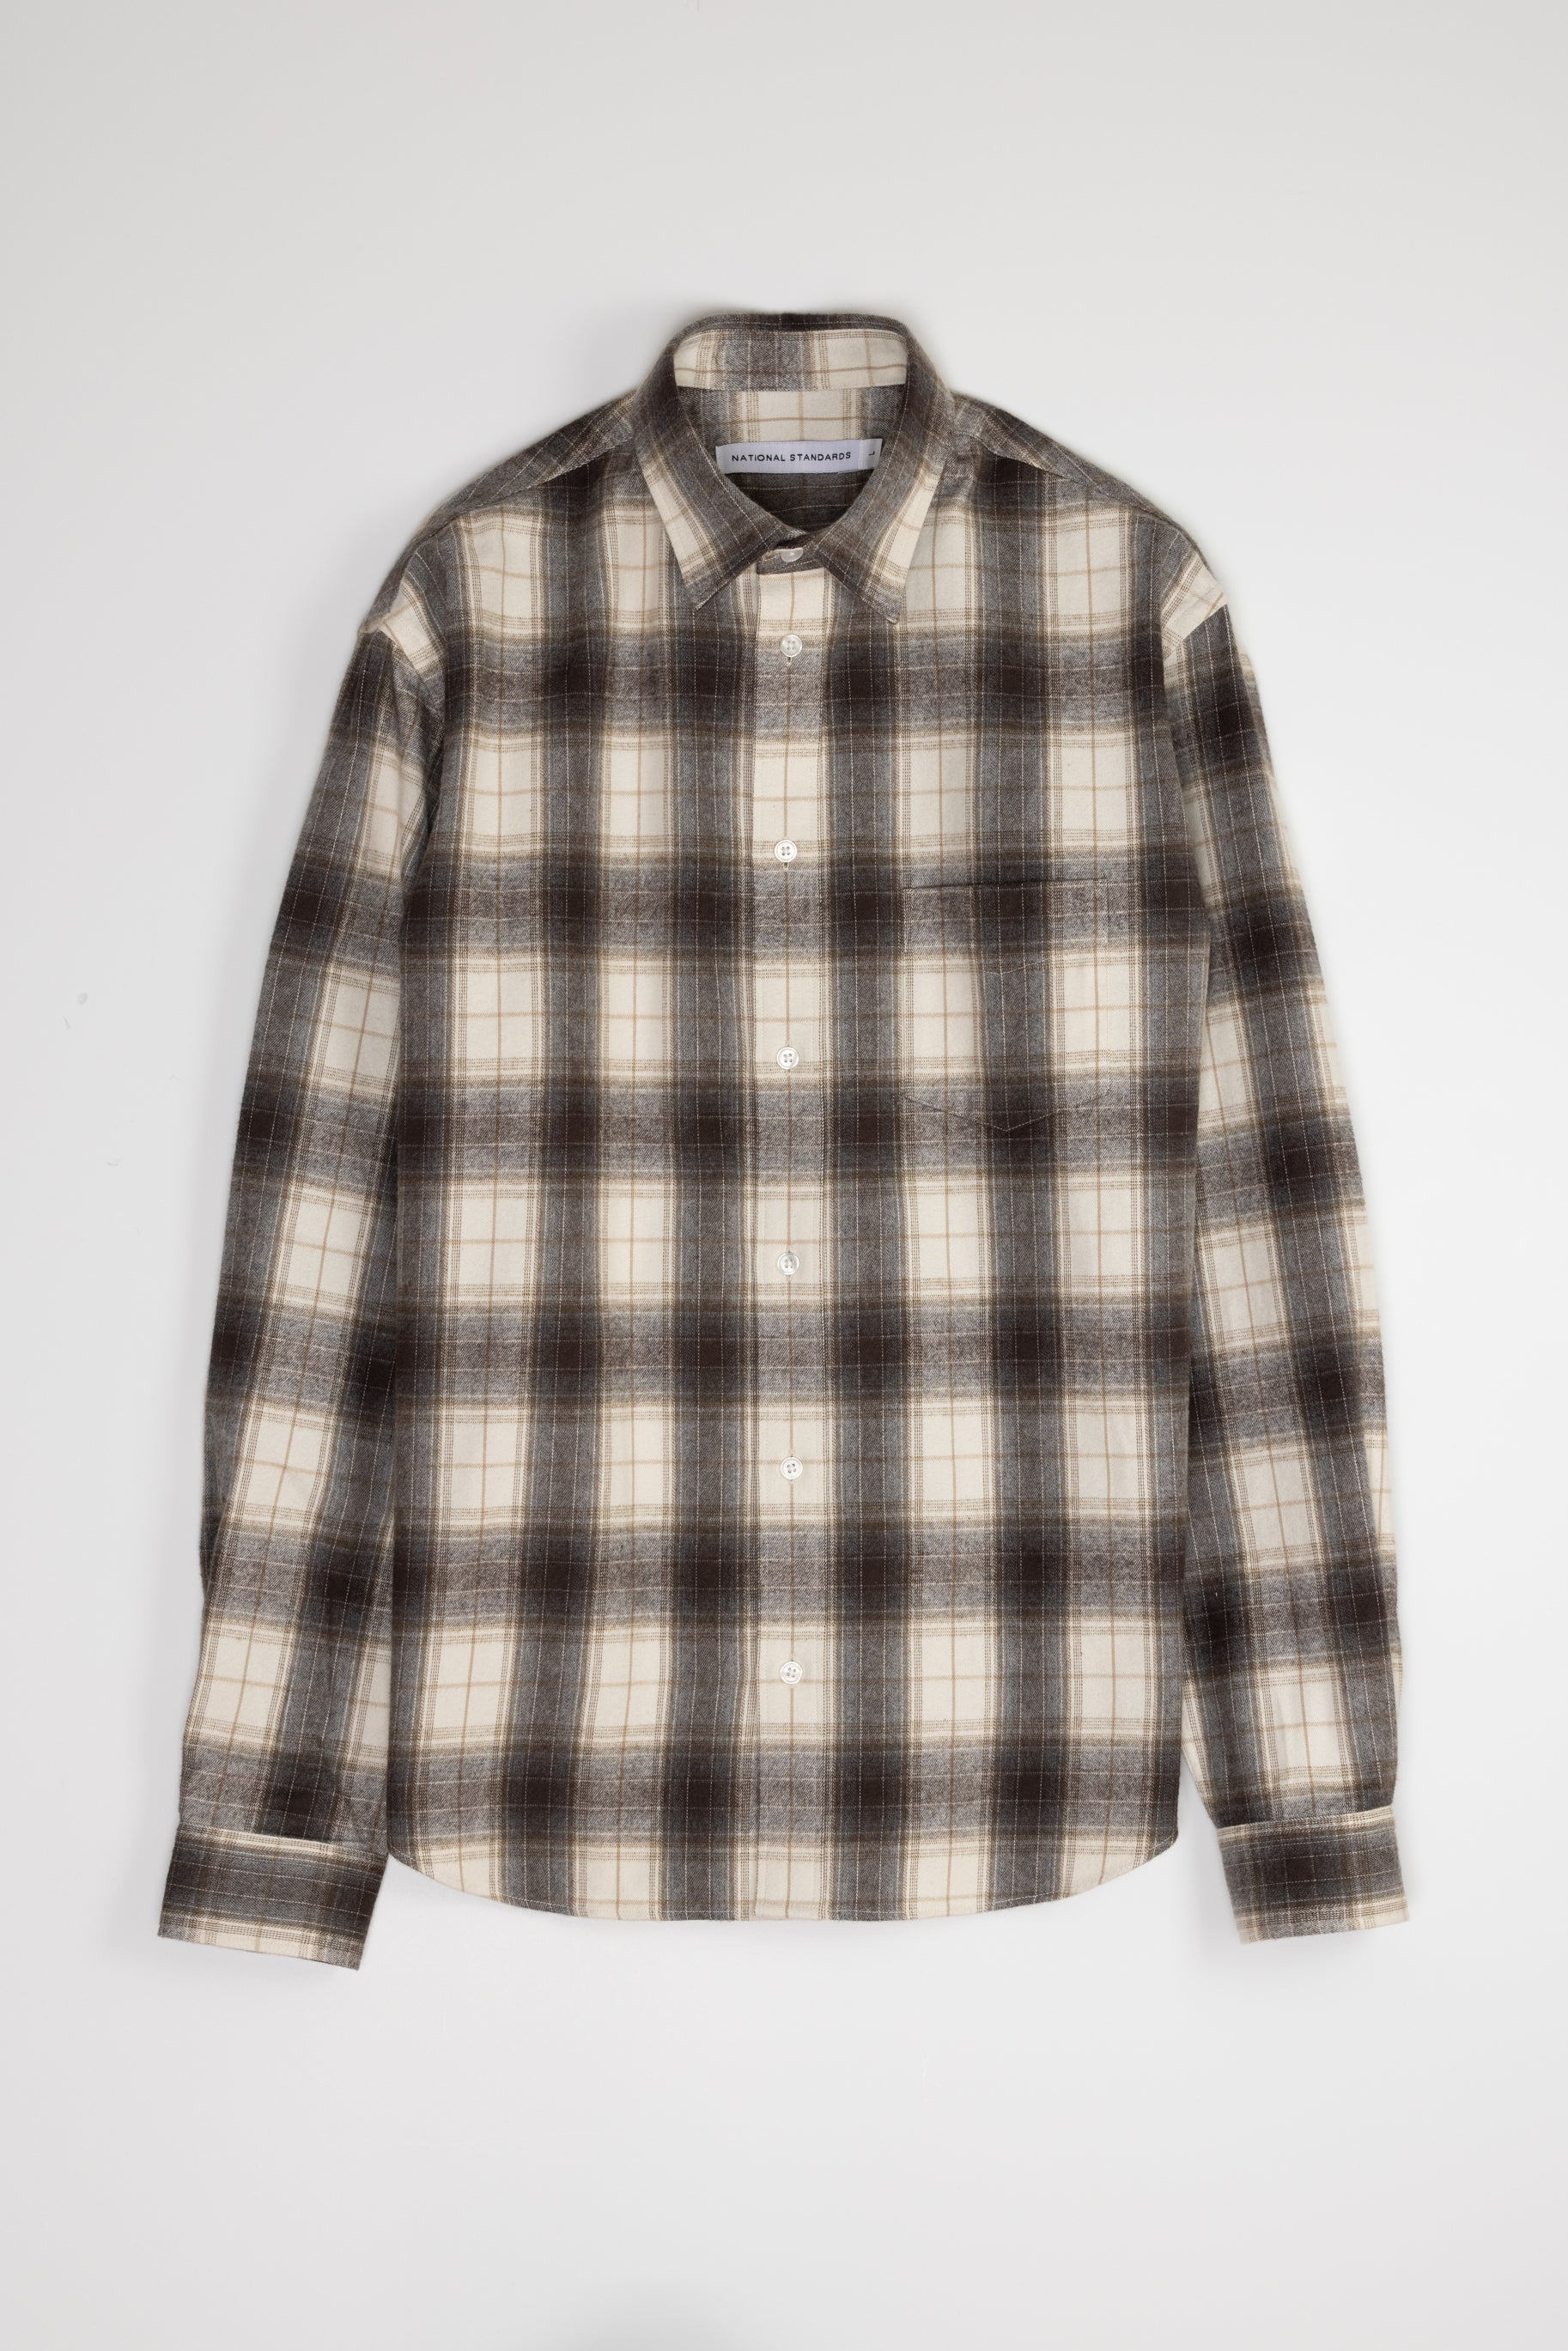 Japanese Shaggy Plaid in Brown and White 01